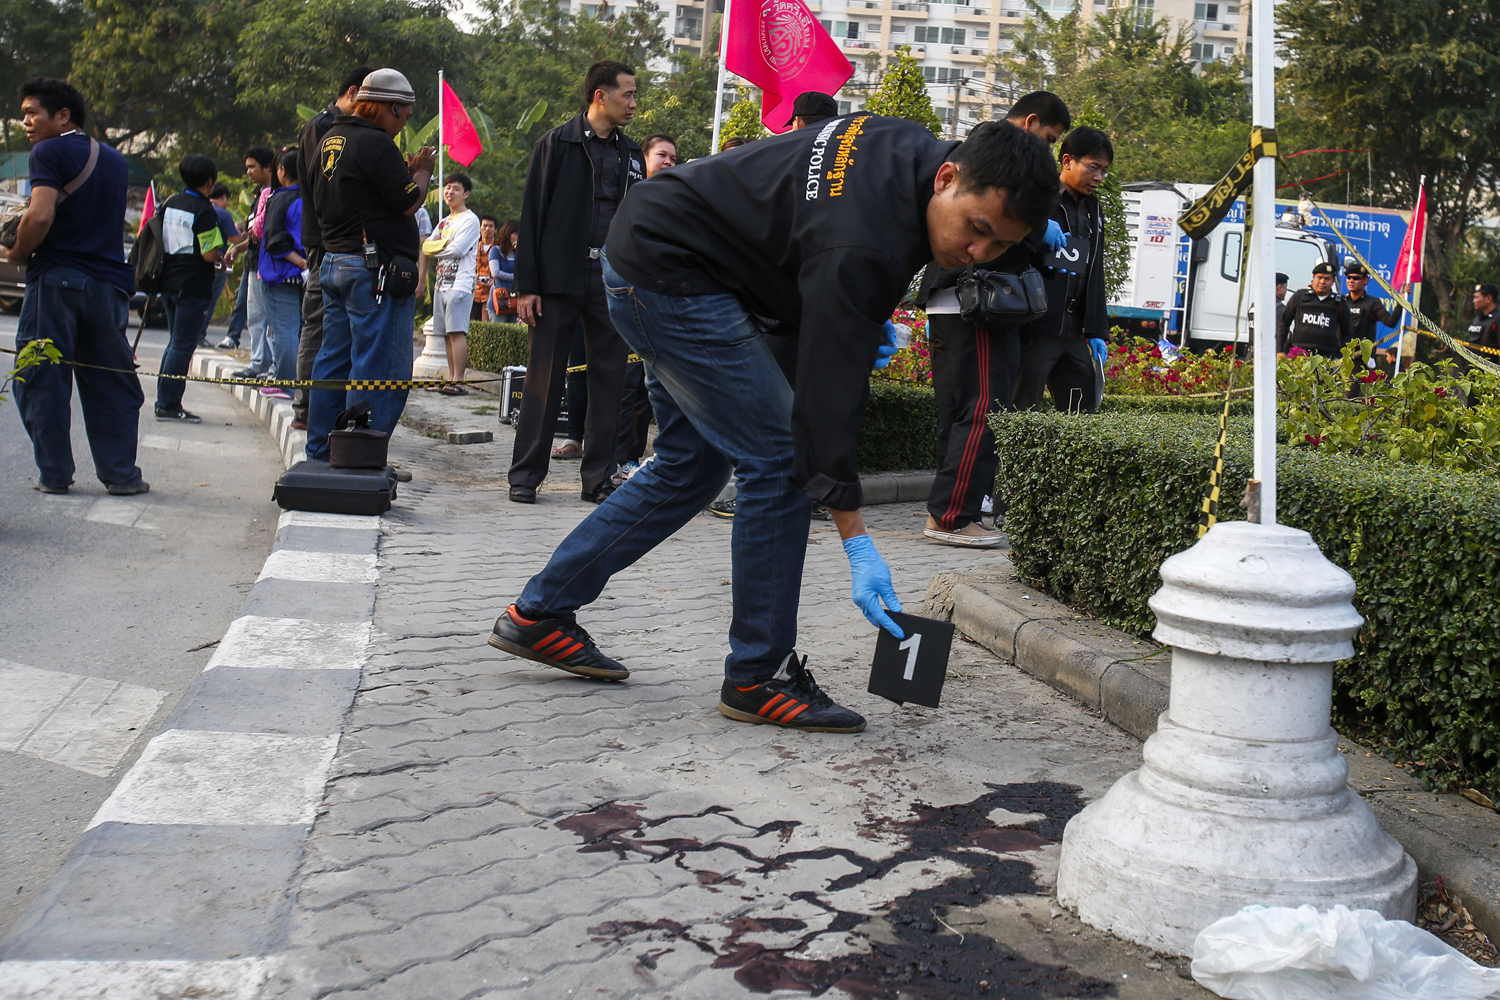 A forensic police officer drops a marker next to blood at the site of what police say were clashes between anti-government protesters and supporters of Prime Minister Yingluck Shinawatra in Bangkok January 26, 2014 (Athit Perawongmetha / Reuters)